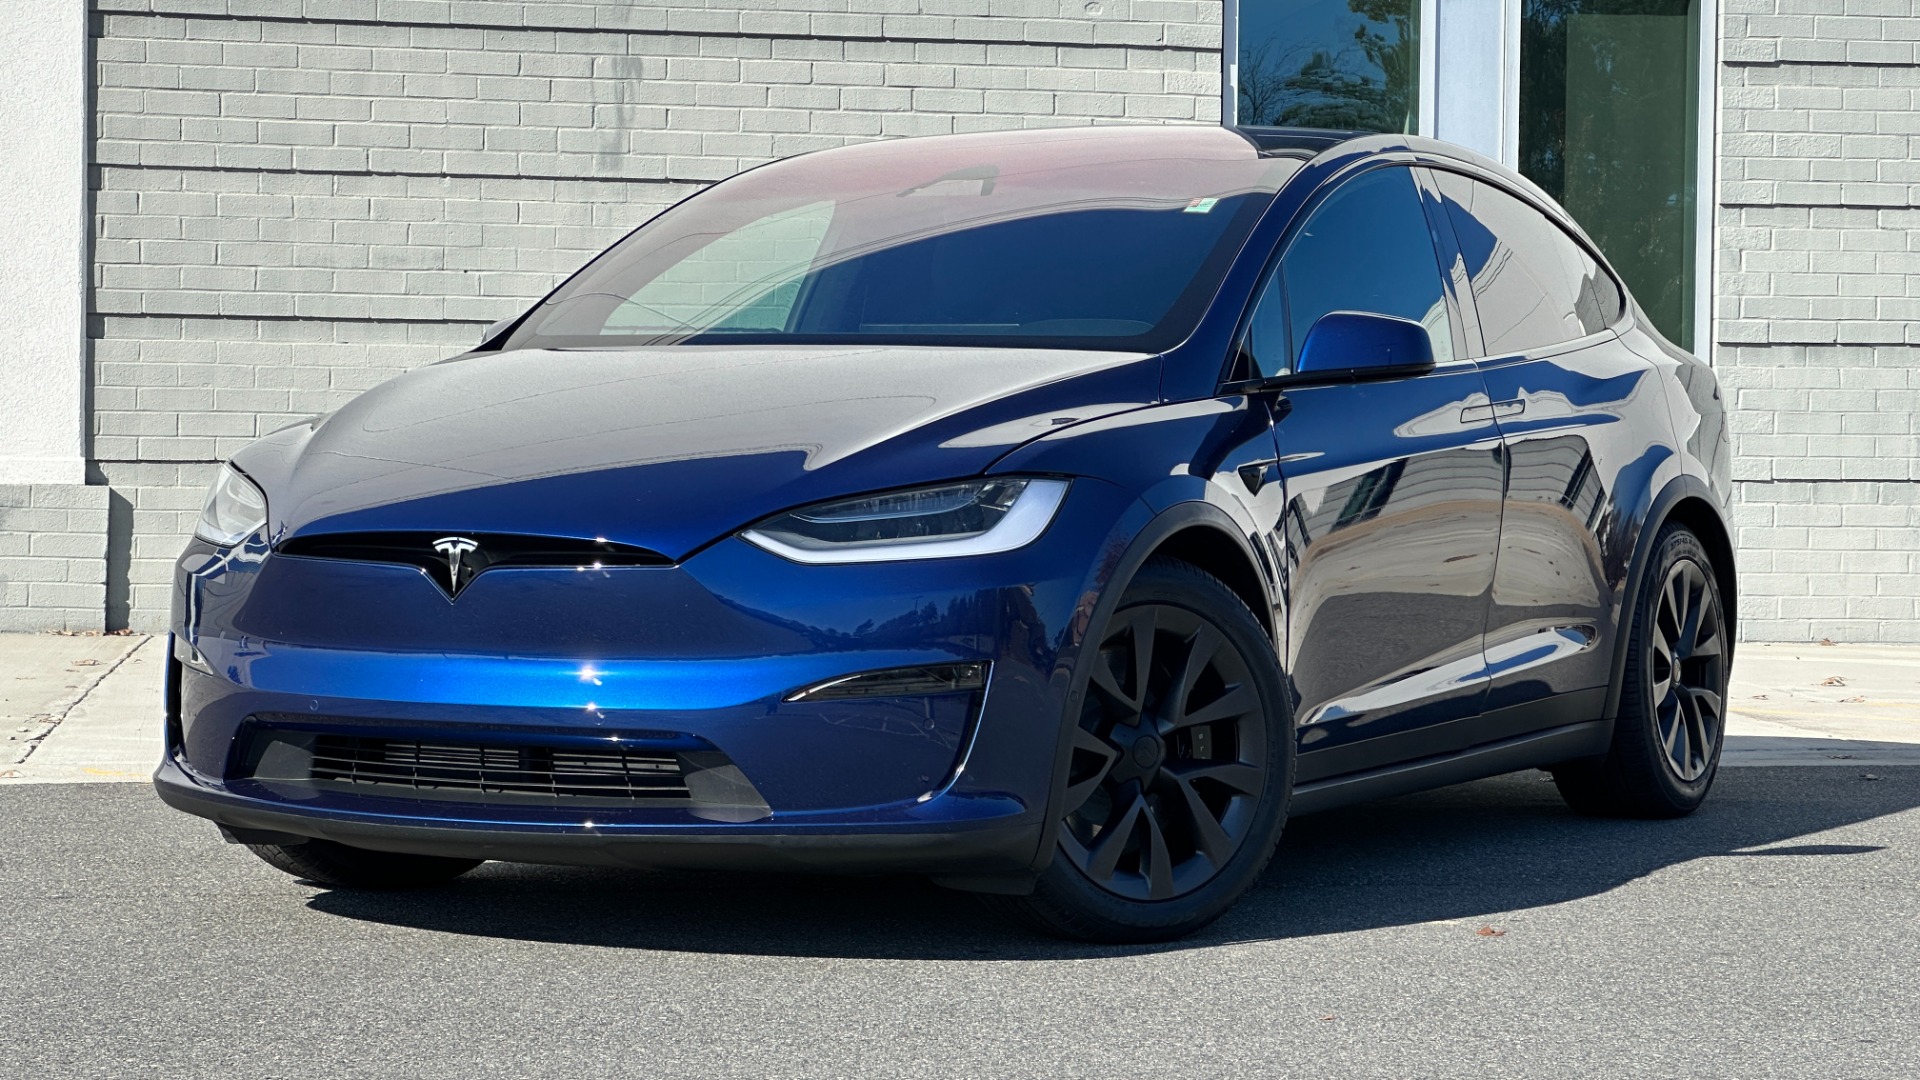 Used 2022 Tesla Model X PLAID / FULL SELF DRIVING CAPABILITY / CARBON FIBER TRIM / PREMIUM CONNECTI for sale Sold at Formula Imports in Charlotte NC 28227 8